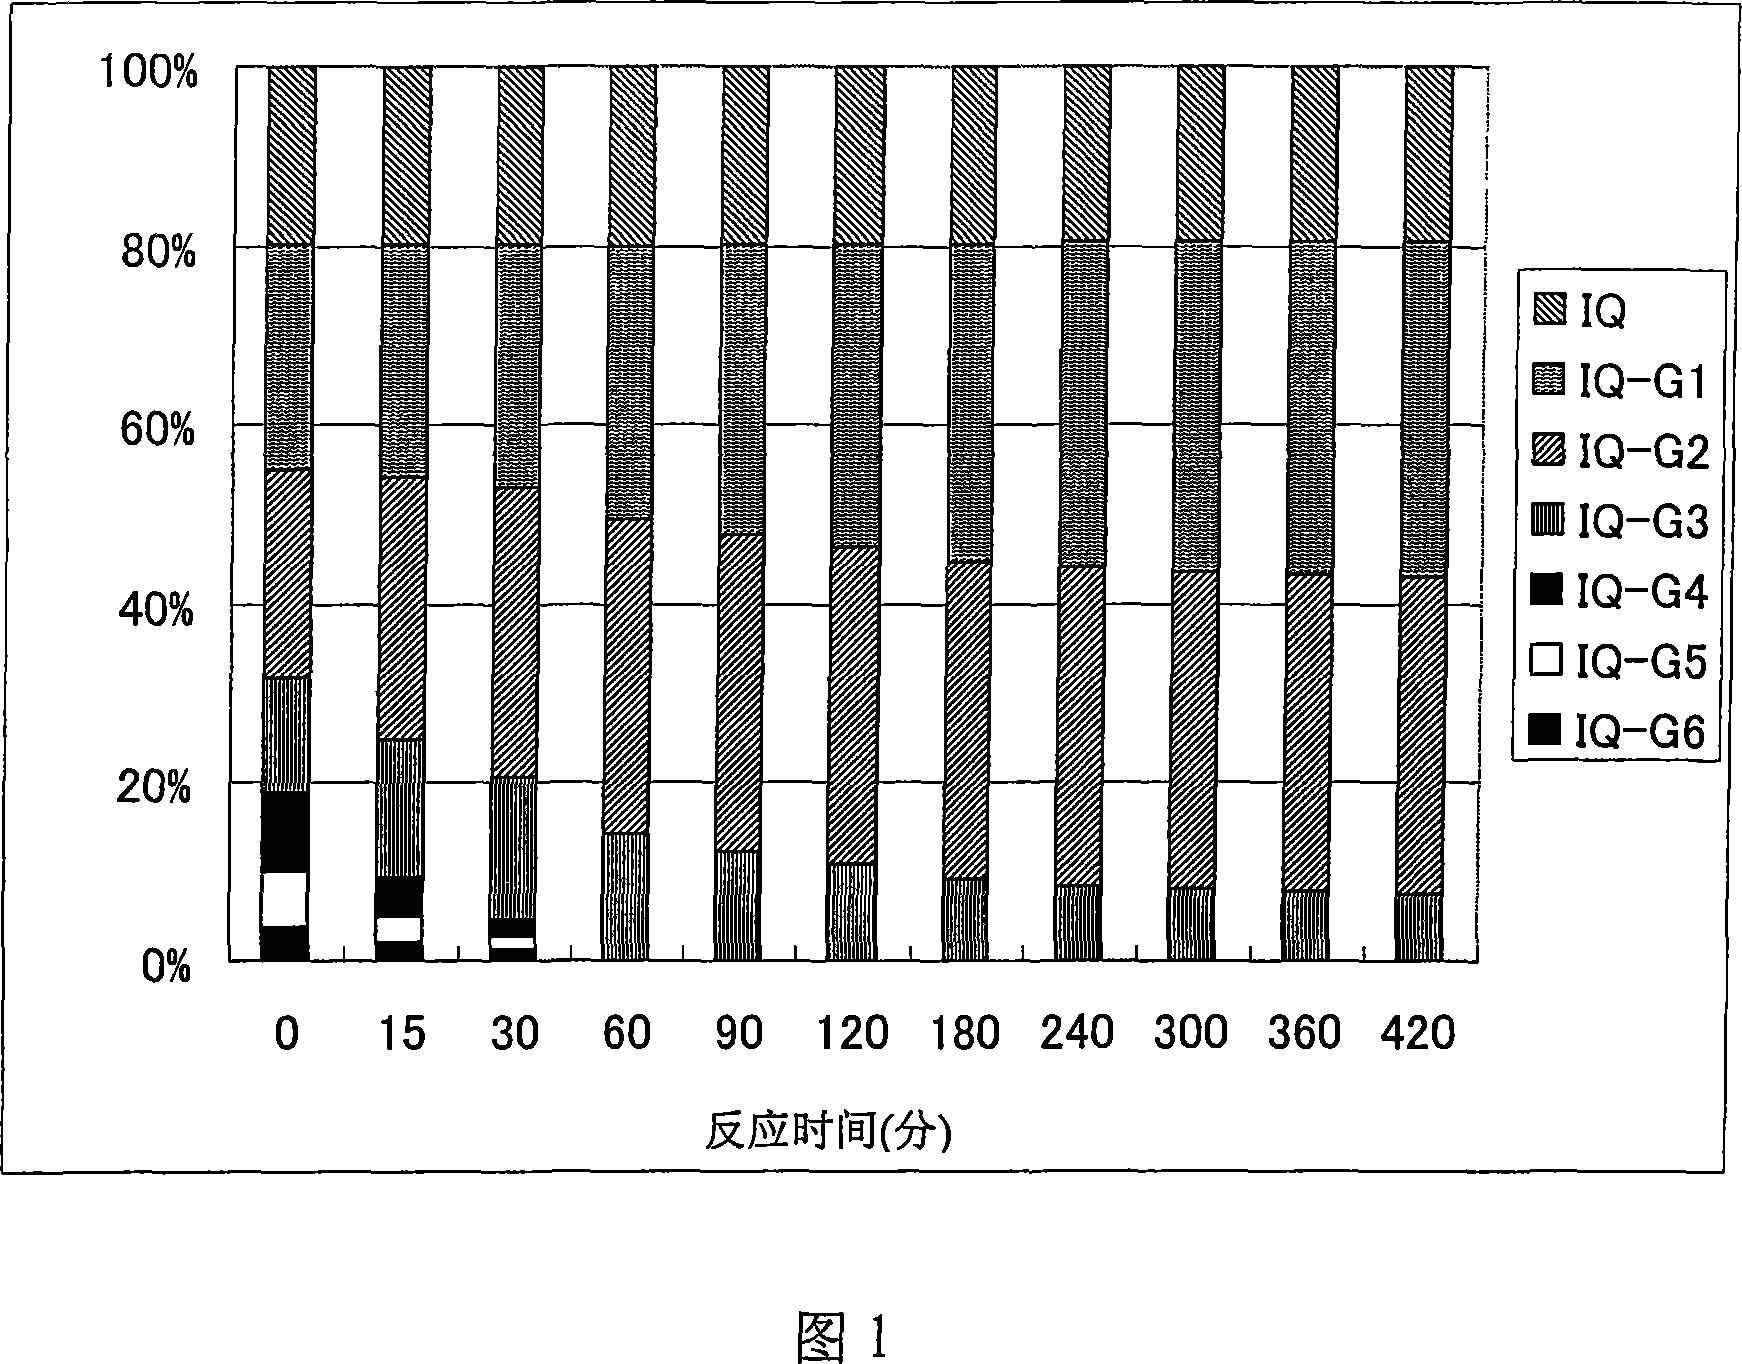 Quercetin glycoside composition and method of preparing the same